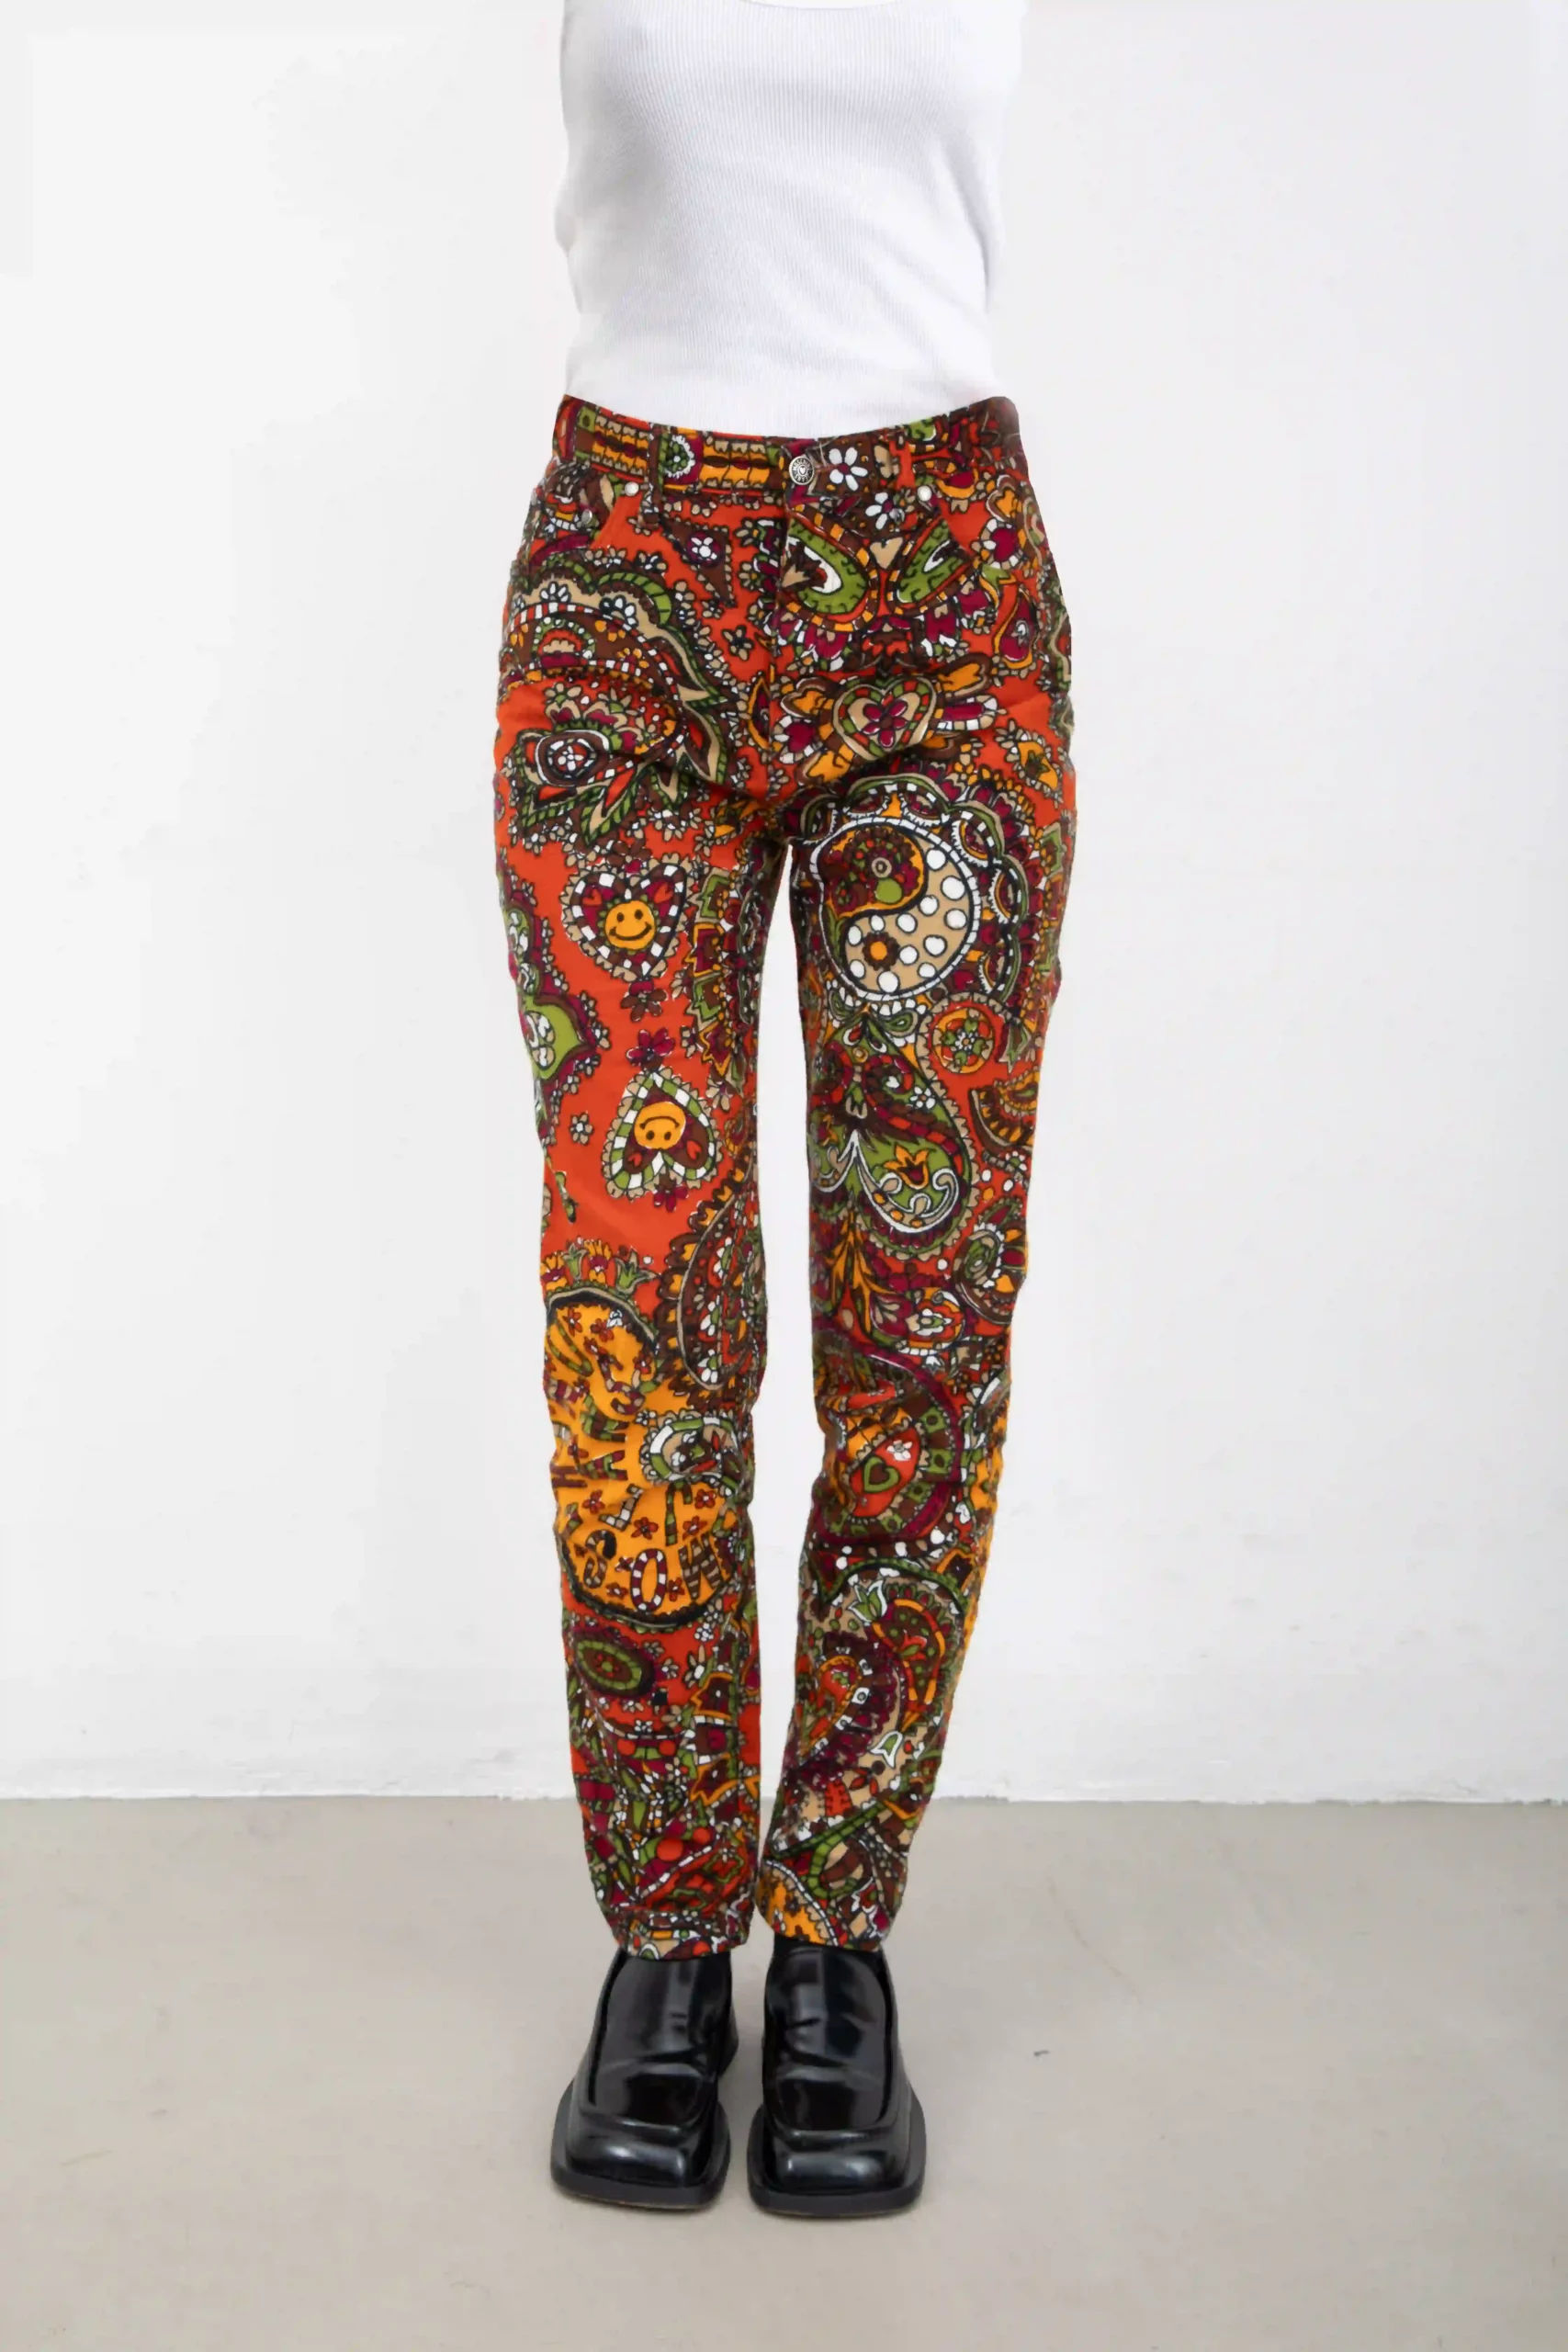 Multicolor Moschino Jeans pants in brick tones, made of 100% cotton printed with velvet effect. Floral motif, with smile, very hippie and fun. Cigarette style, jeans-like model. With metal peace symbol patch on the back pocket.